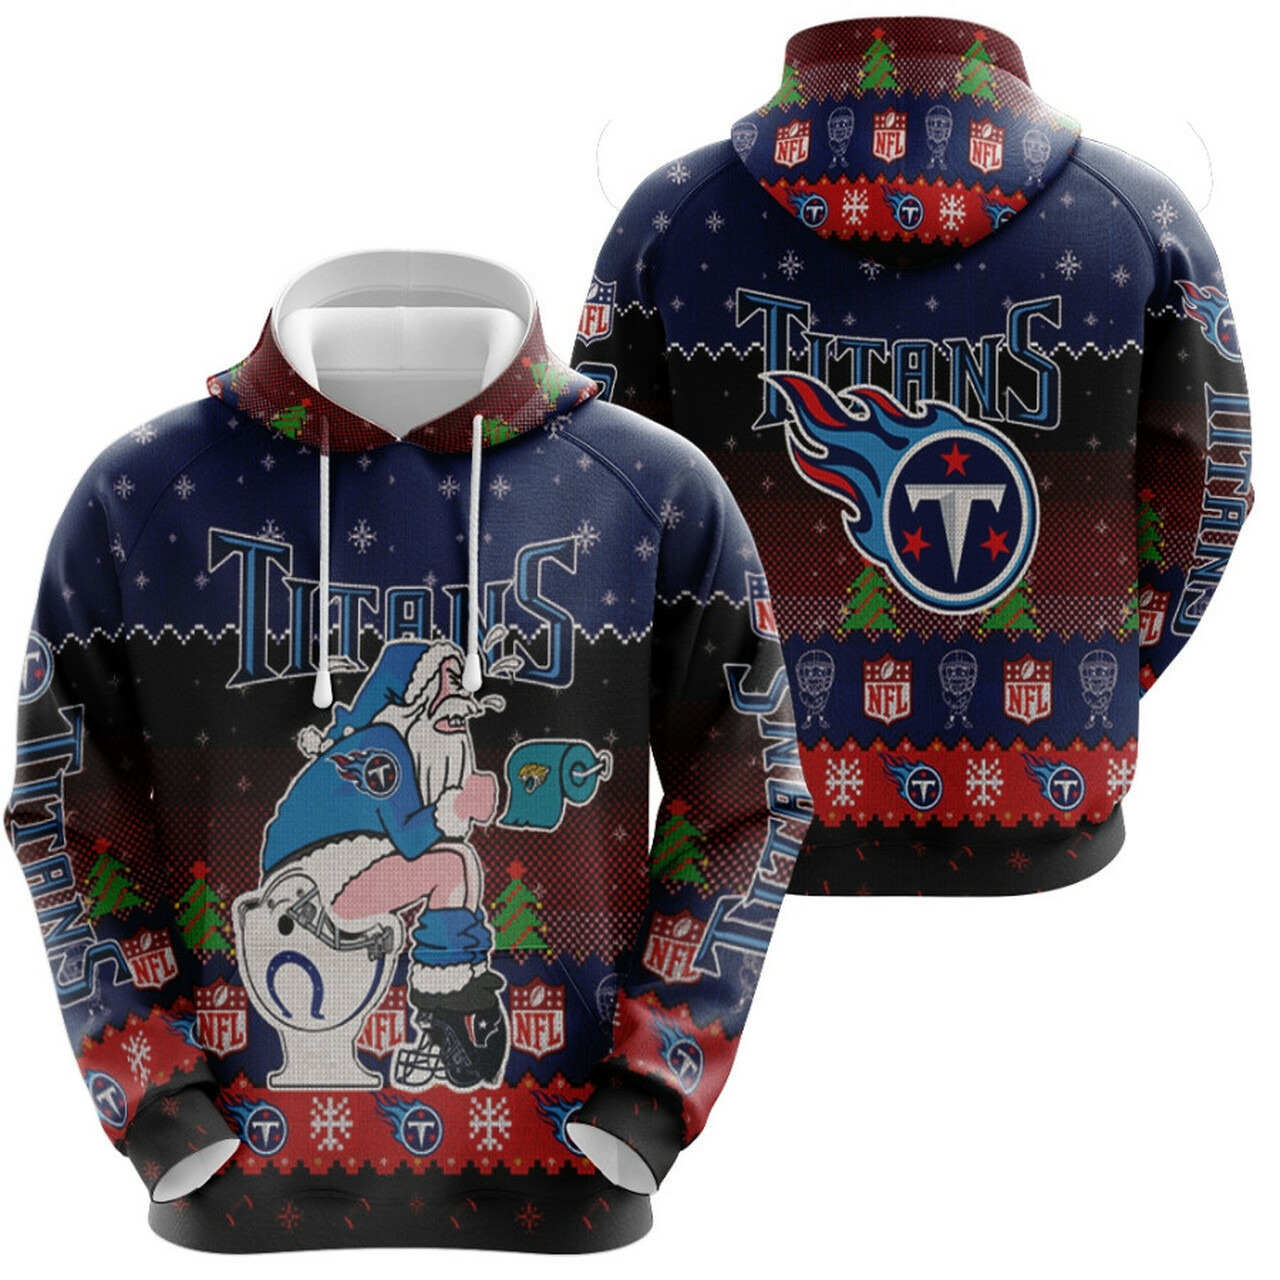 Santa Claus Tennessee Titans Sitting On Jaguars Titans Colts Toilet Christmas Gift For Titans Fans Hoodie